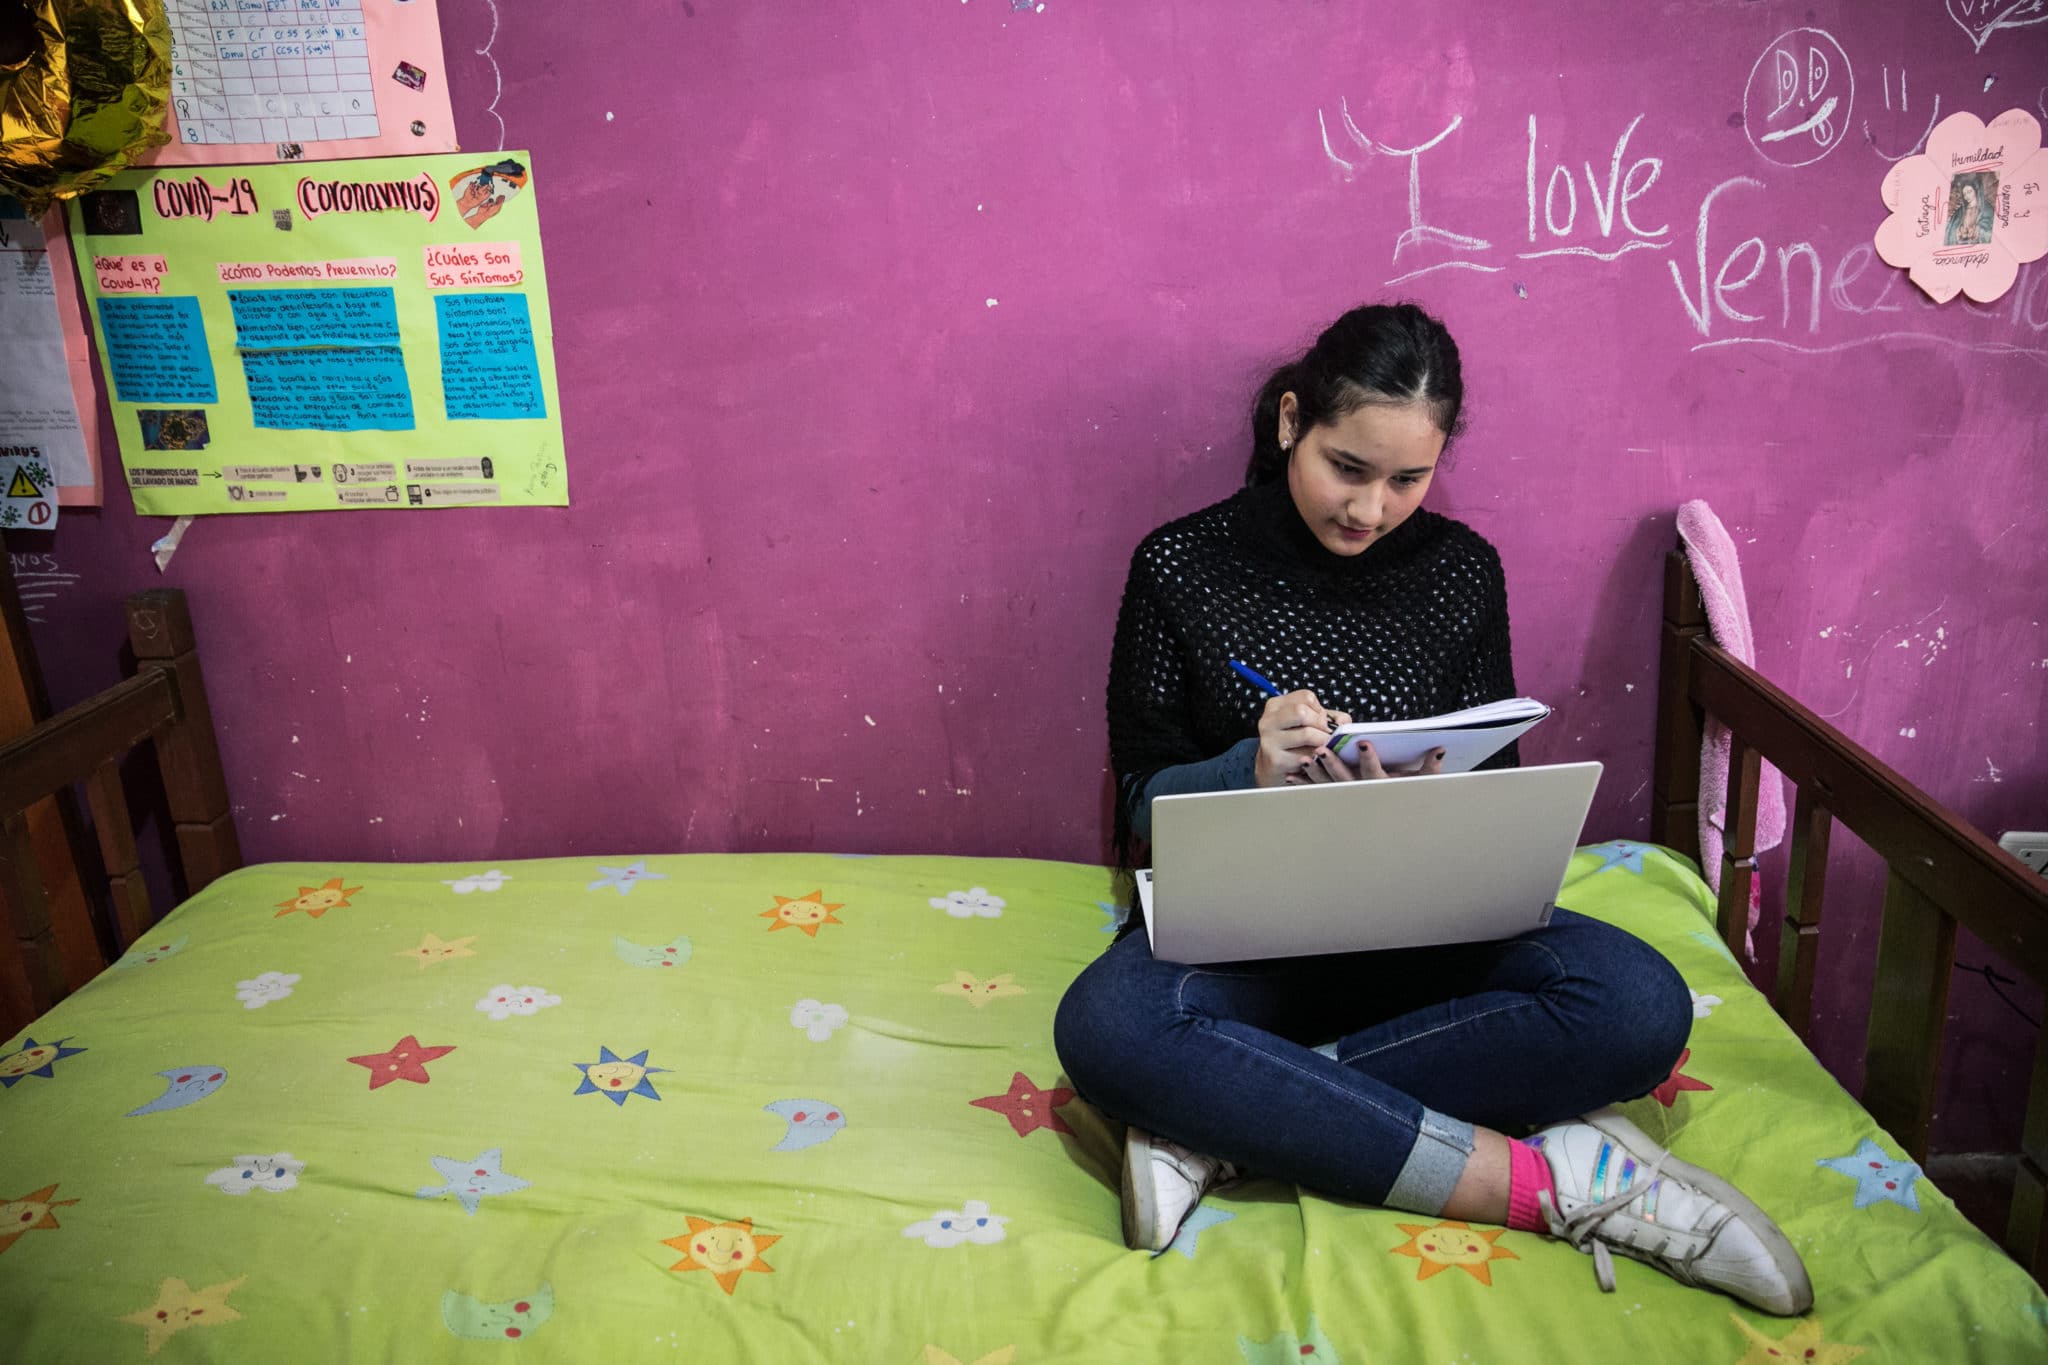 Teenage girl with dark hair pulled back into a ponytail sits crosslegged on her bed. She is wearing a black turtleneck, jeans and running shoes. She is holding a pen in her right hand writing in a notebook with a laptop computer in her lap.